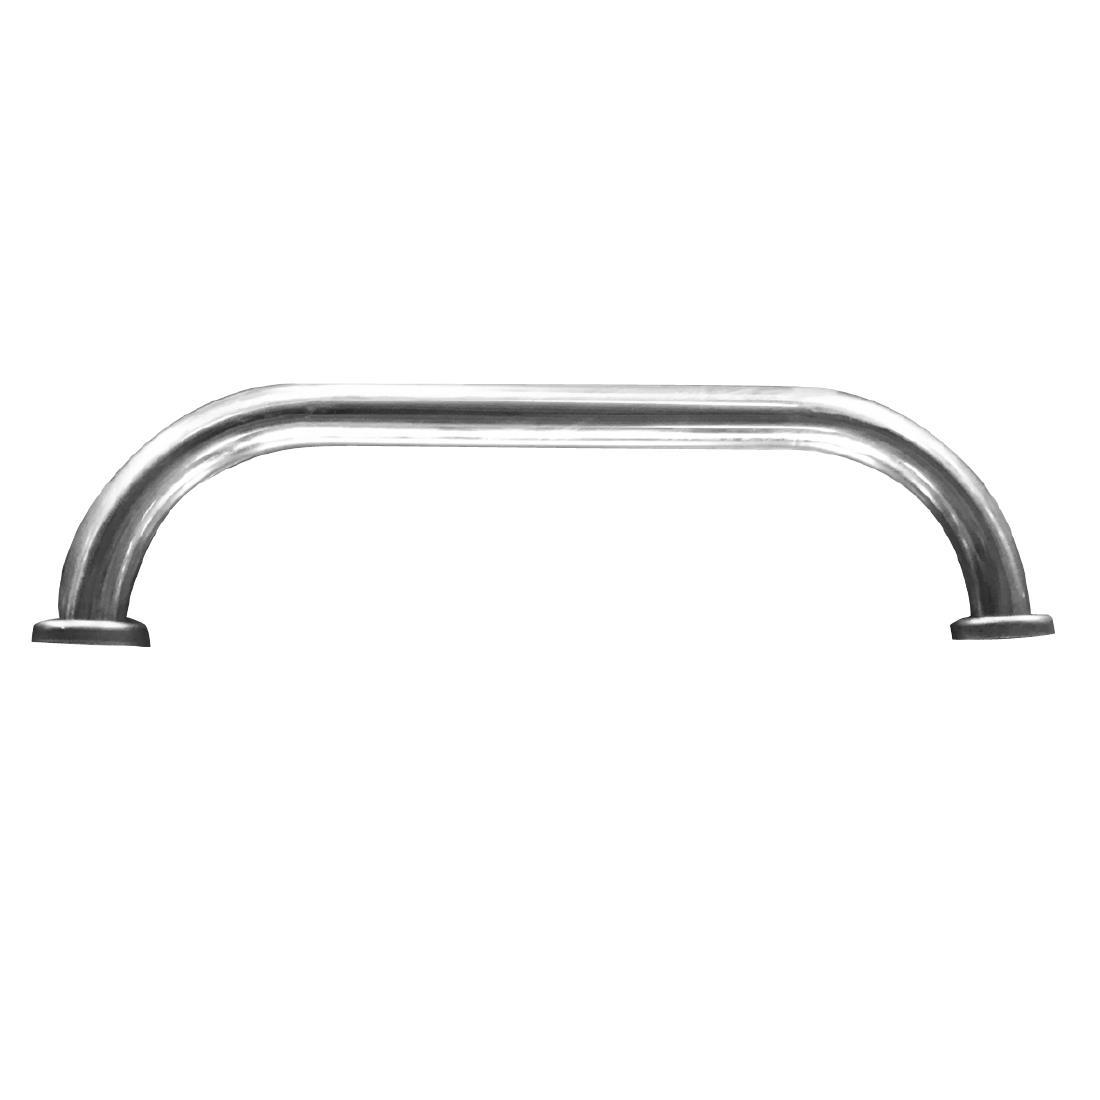 Buffalo Handle for Drip Tray for Combi BBQ and Griddle - AG917  - 1